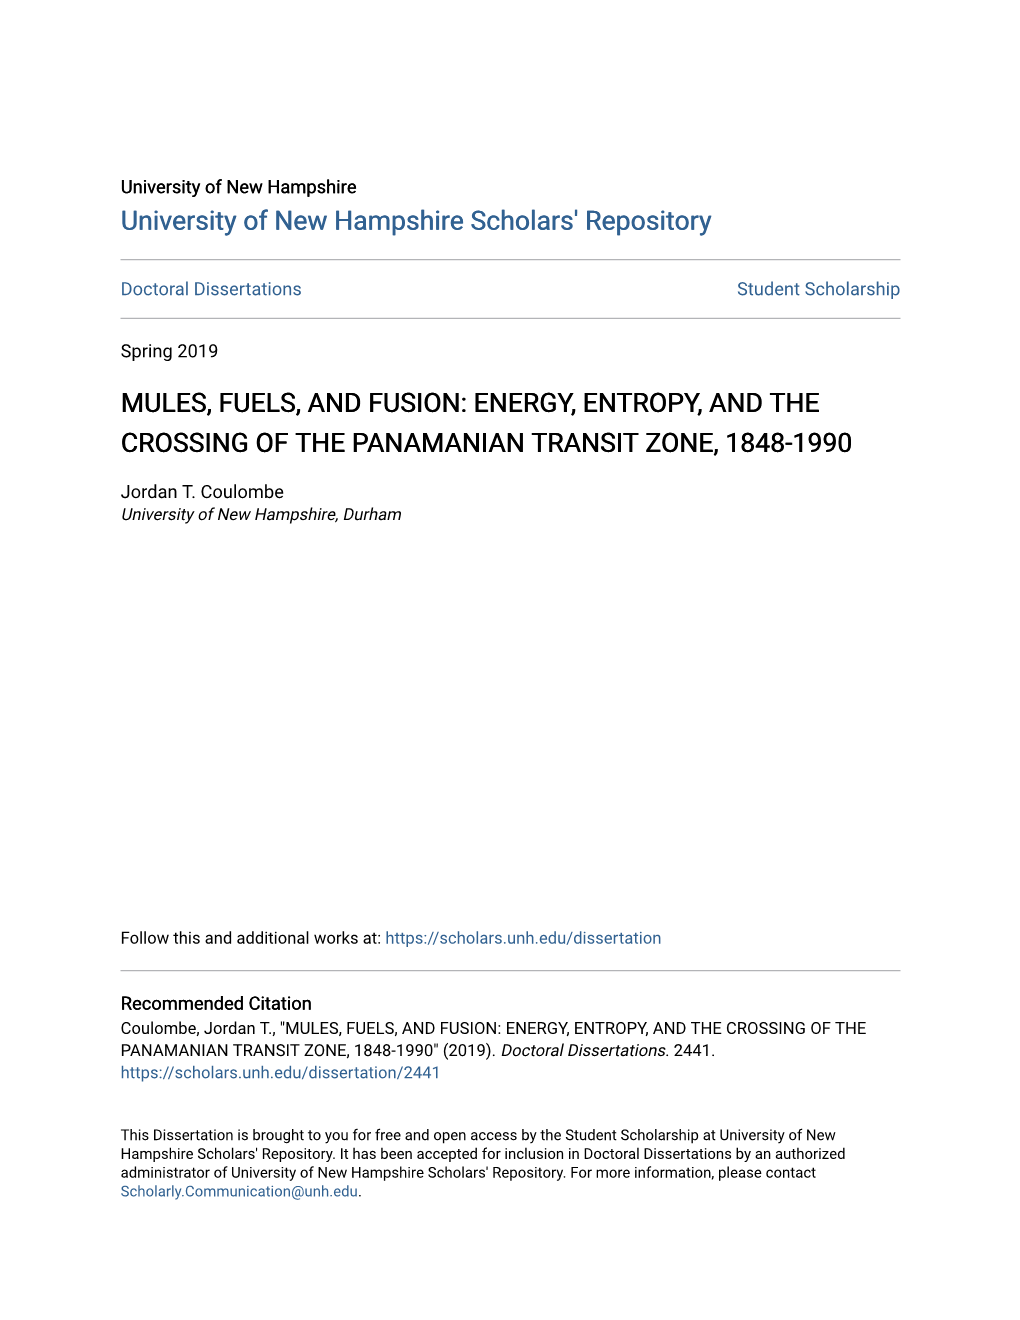 Mules, Fuels, and Fusion: Energy, Entropy, and the Crossing of the Panamanian Transit Zone, 1848-1990